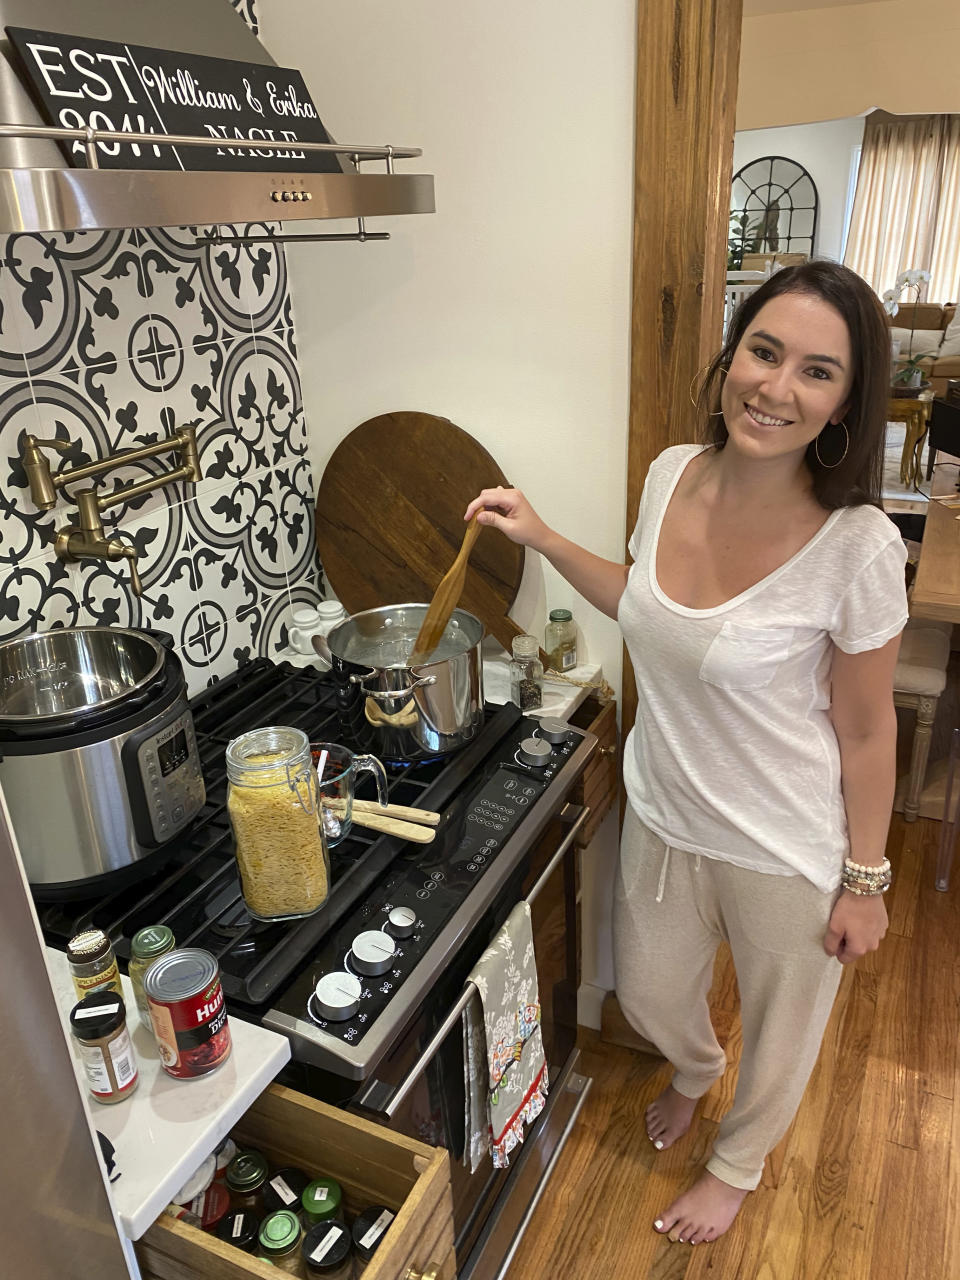 This July 26, 2020 photo shows Erika Navarrete Nagle, a television producer in Denver, Colo., preparing a meal for her family in Denver. Before she began quarantining in late March, the 33-year-old had never cooked chicken. "I was a mess in the kitchen,'' she says. ''I grew up in a Cuban family with a mother and sister who always cooked for me. You'd think I picked up a thing or two, but I've always been a workaholic and I never made time nor had the desire to cook." "It took a global pandemic and mandatory quarantine for me to learn," she says. (William Nagle via AP)